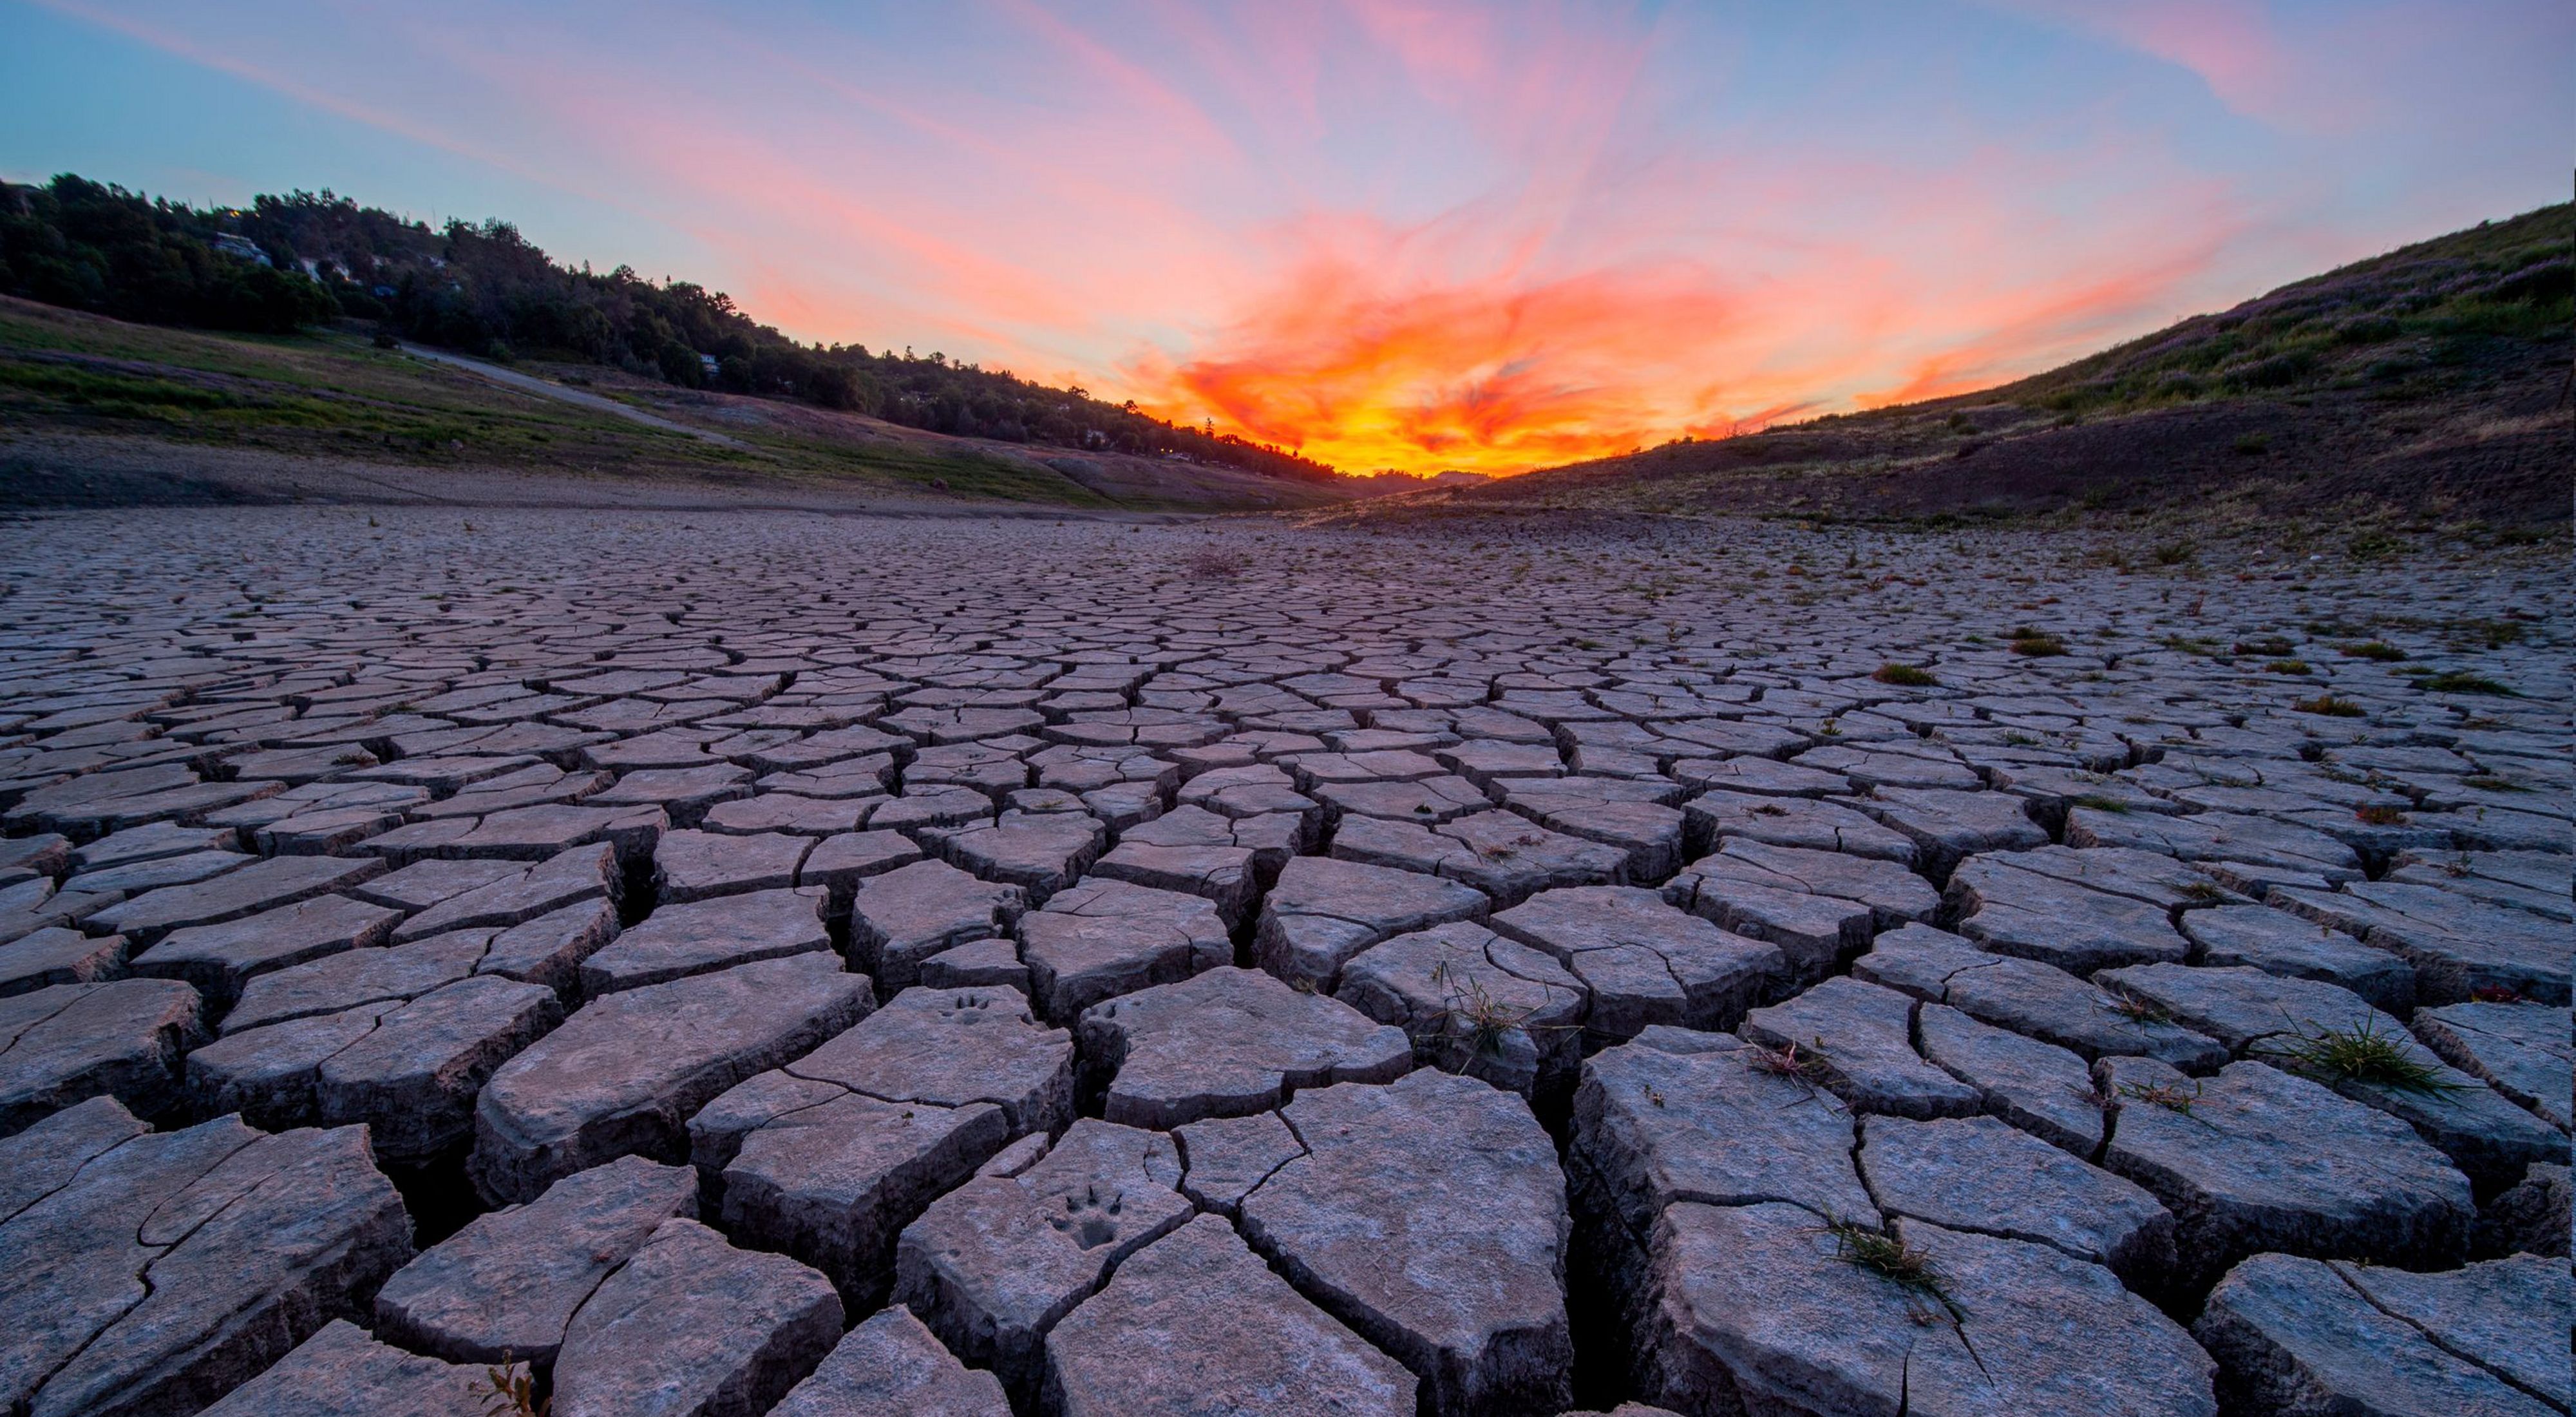 Photo of an orange sunset across a parched, cracked riverbed.